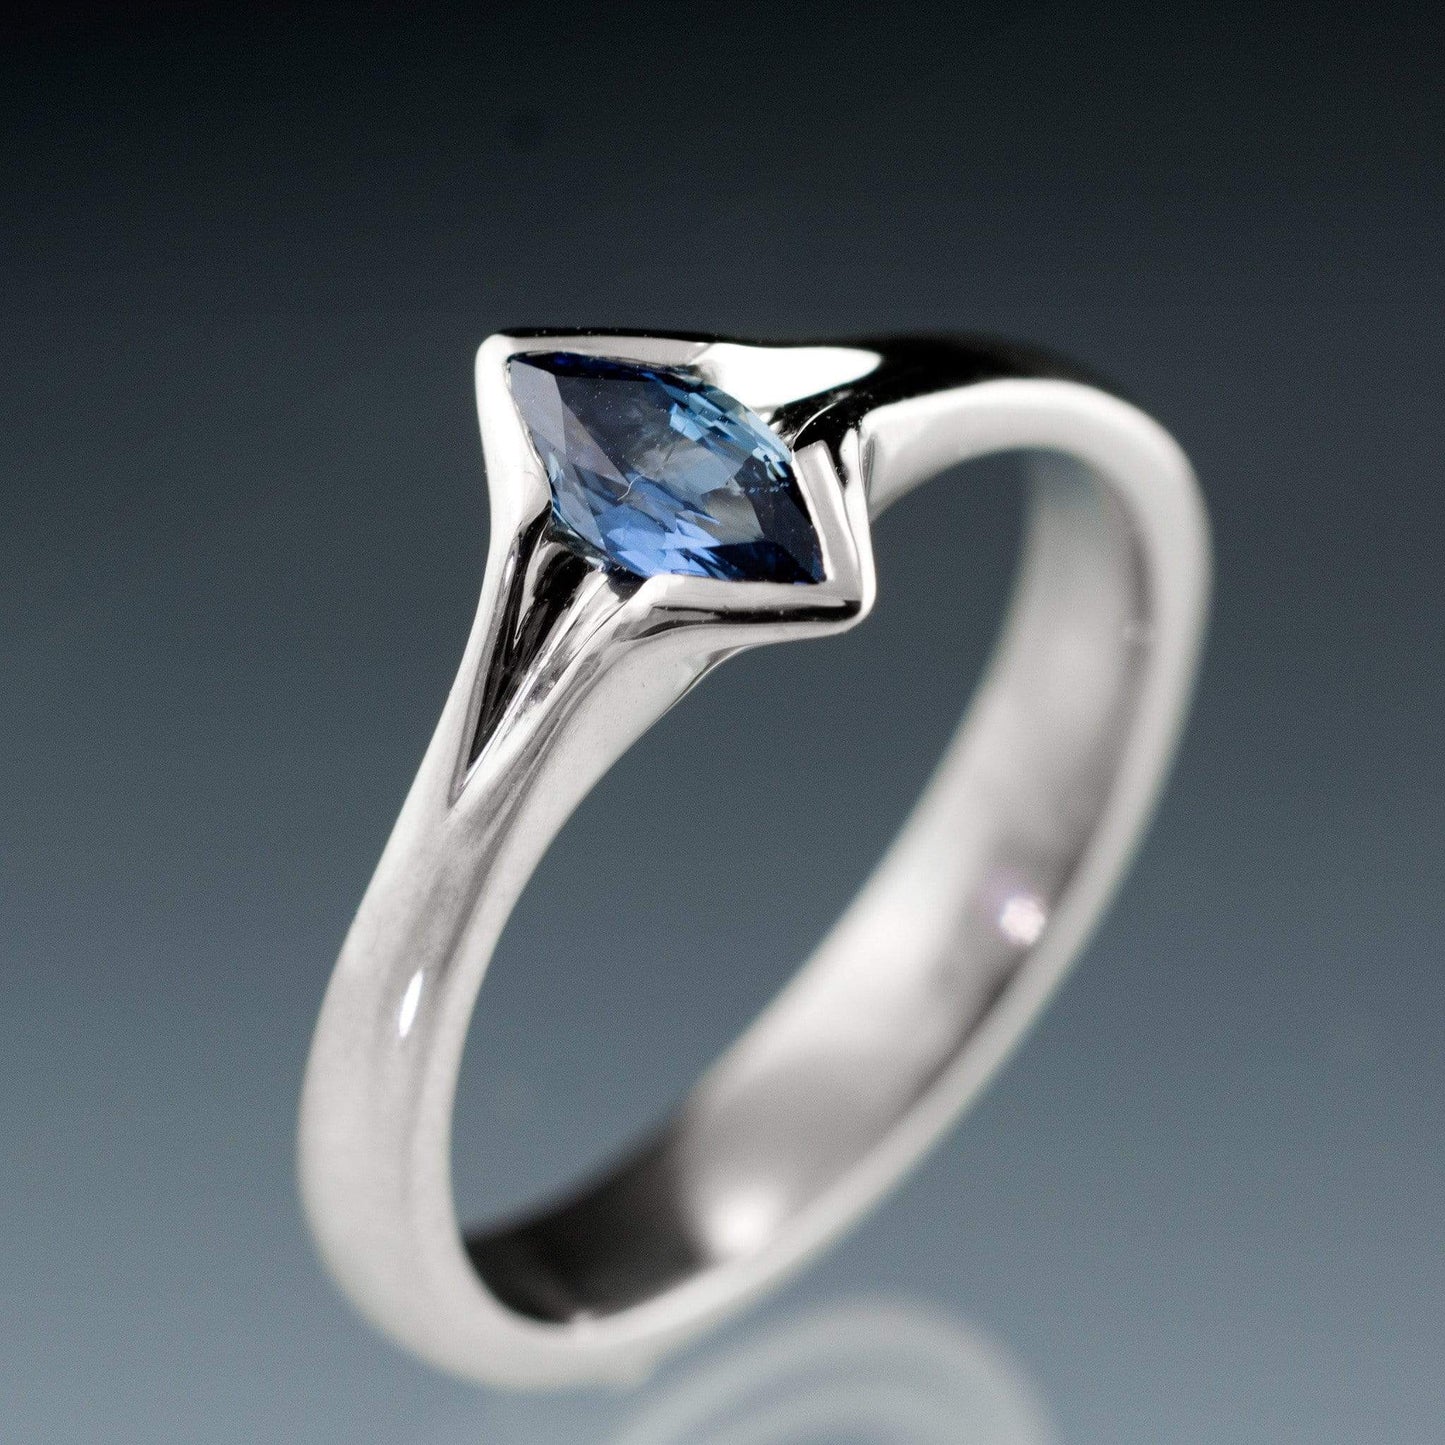 Marquise Blue Sapphire Semi-Bezel Solitaire Engagement Ring Ring by Nodeform